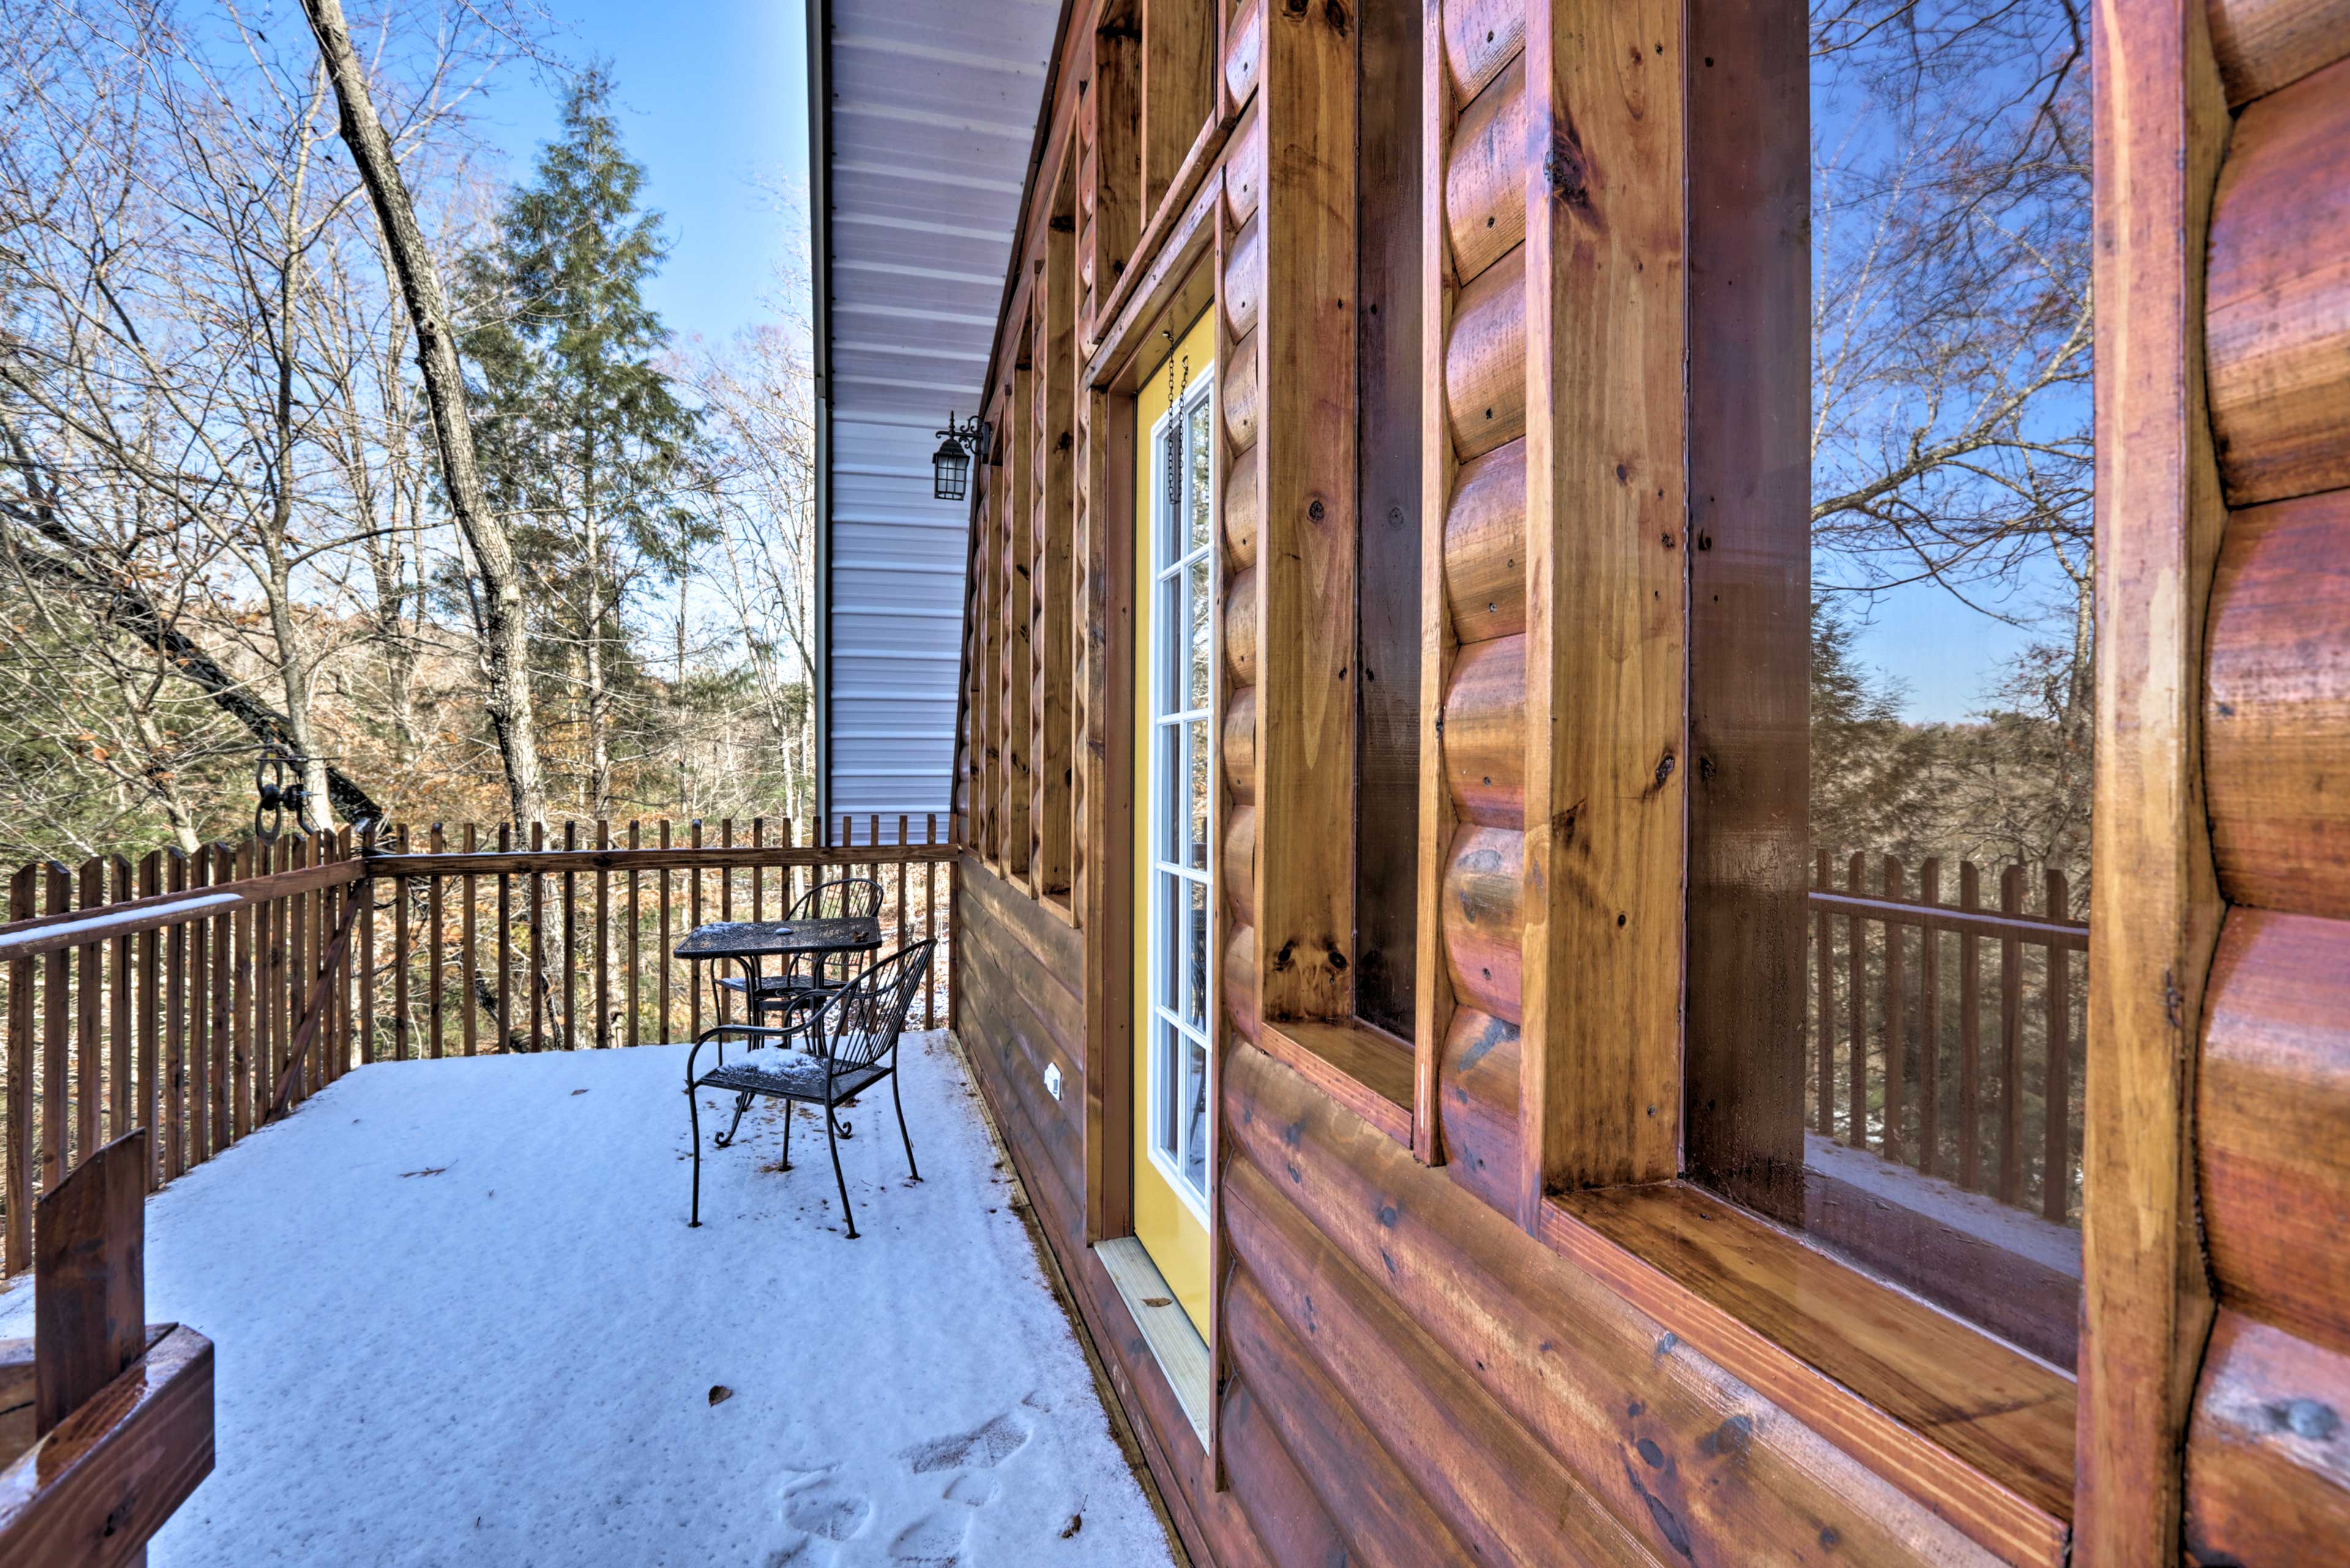 Beattyville Cabin w/ Decks By the Red River Gorge!